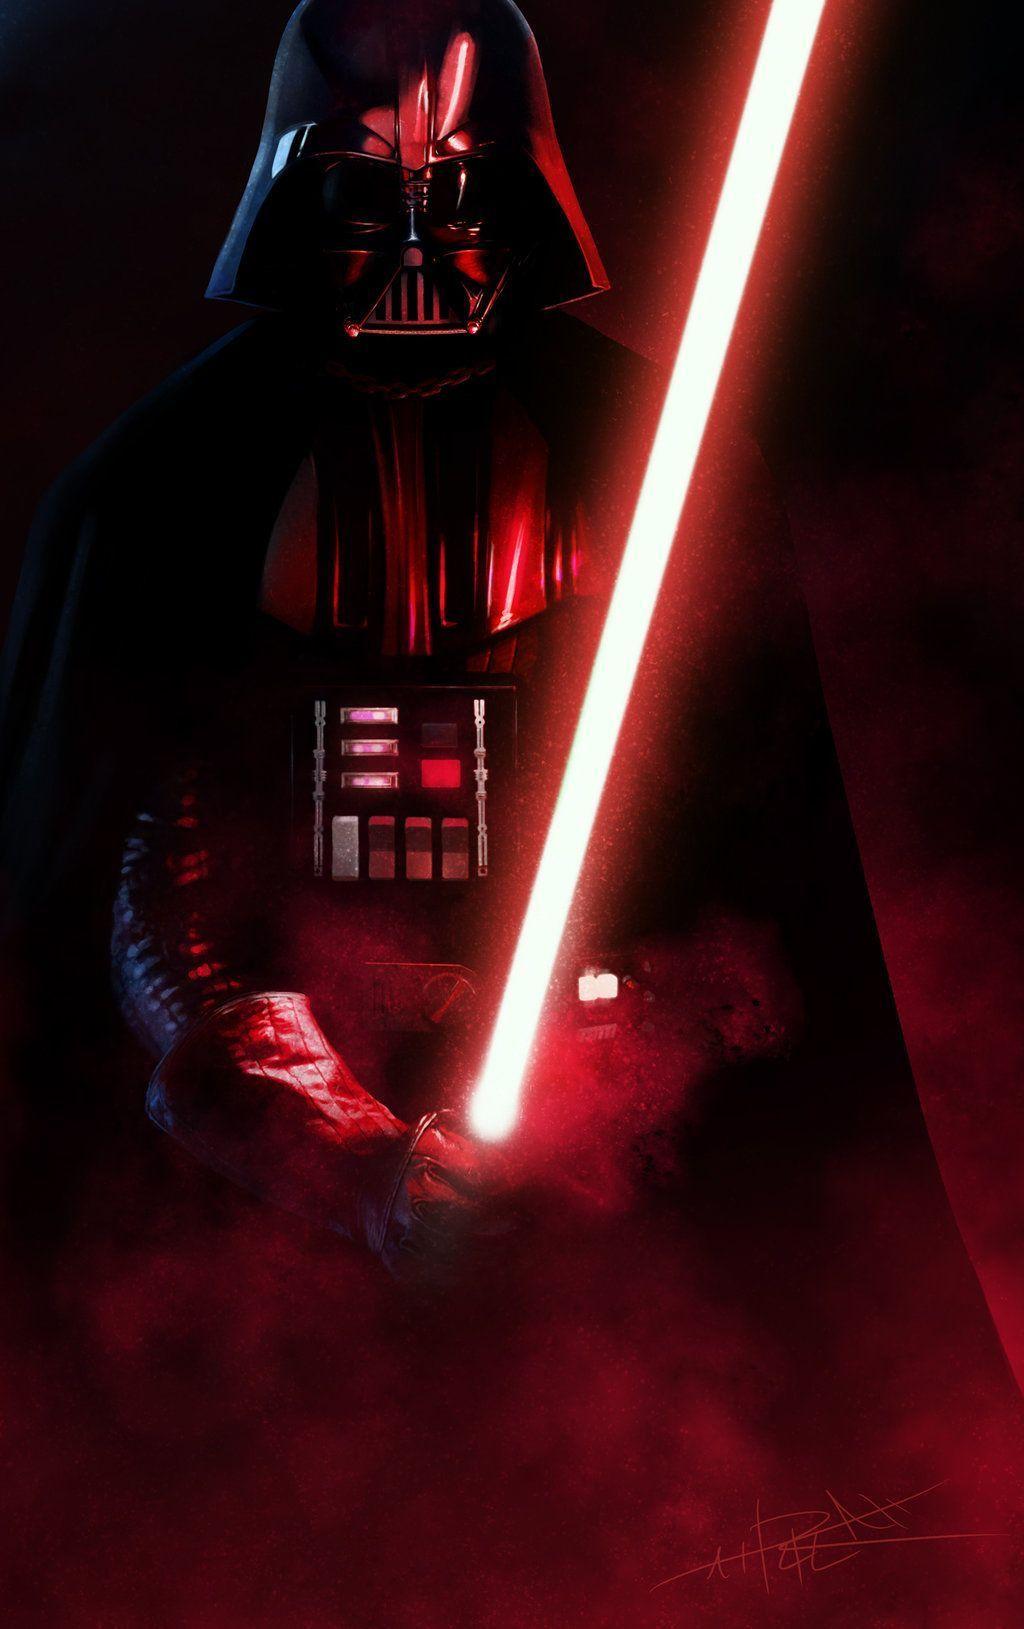 Darth Vader Wallpaper Iphone 12 Pro Max / Download all photos and use